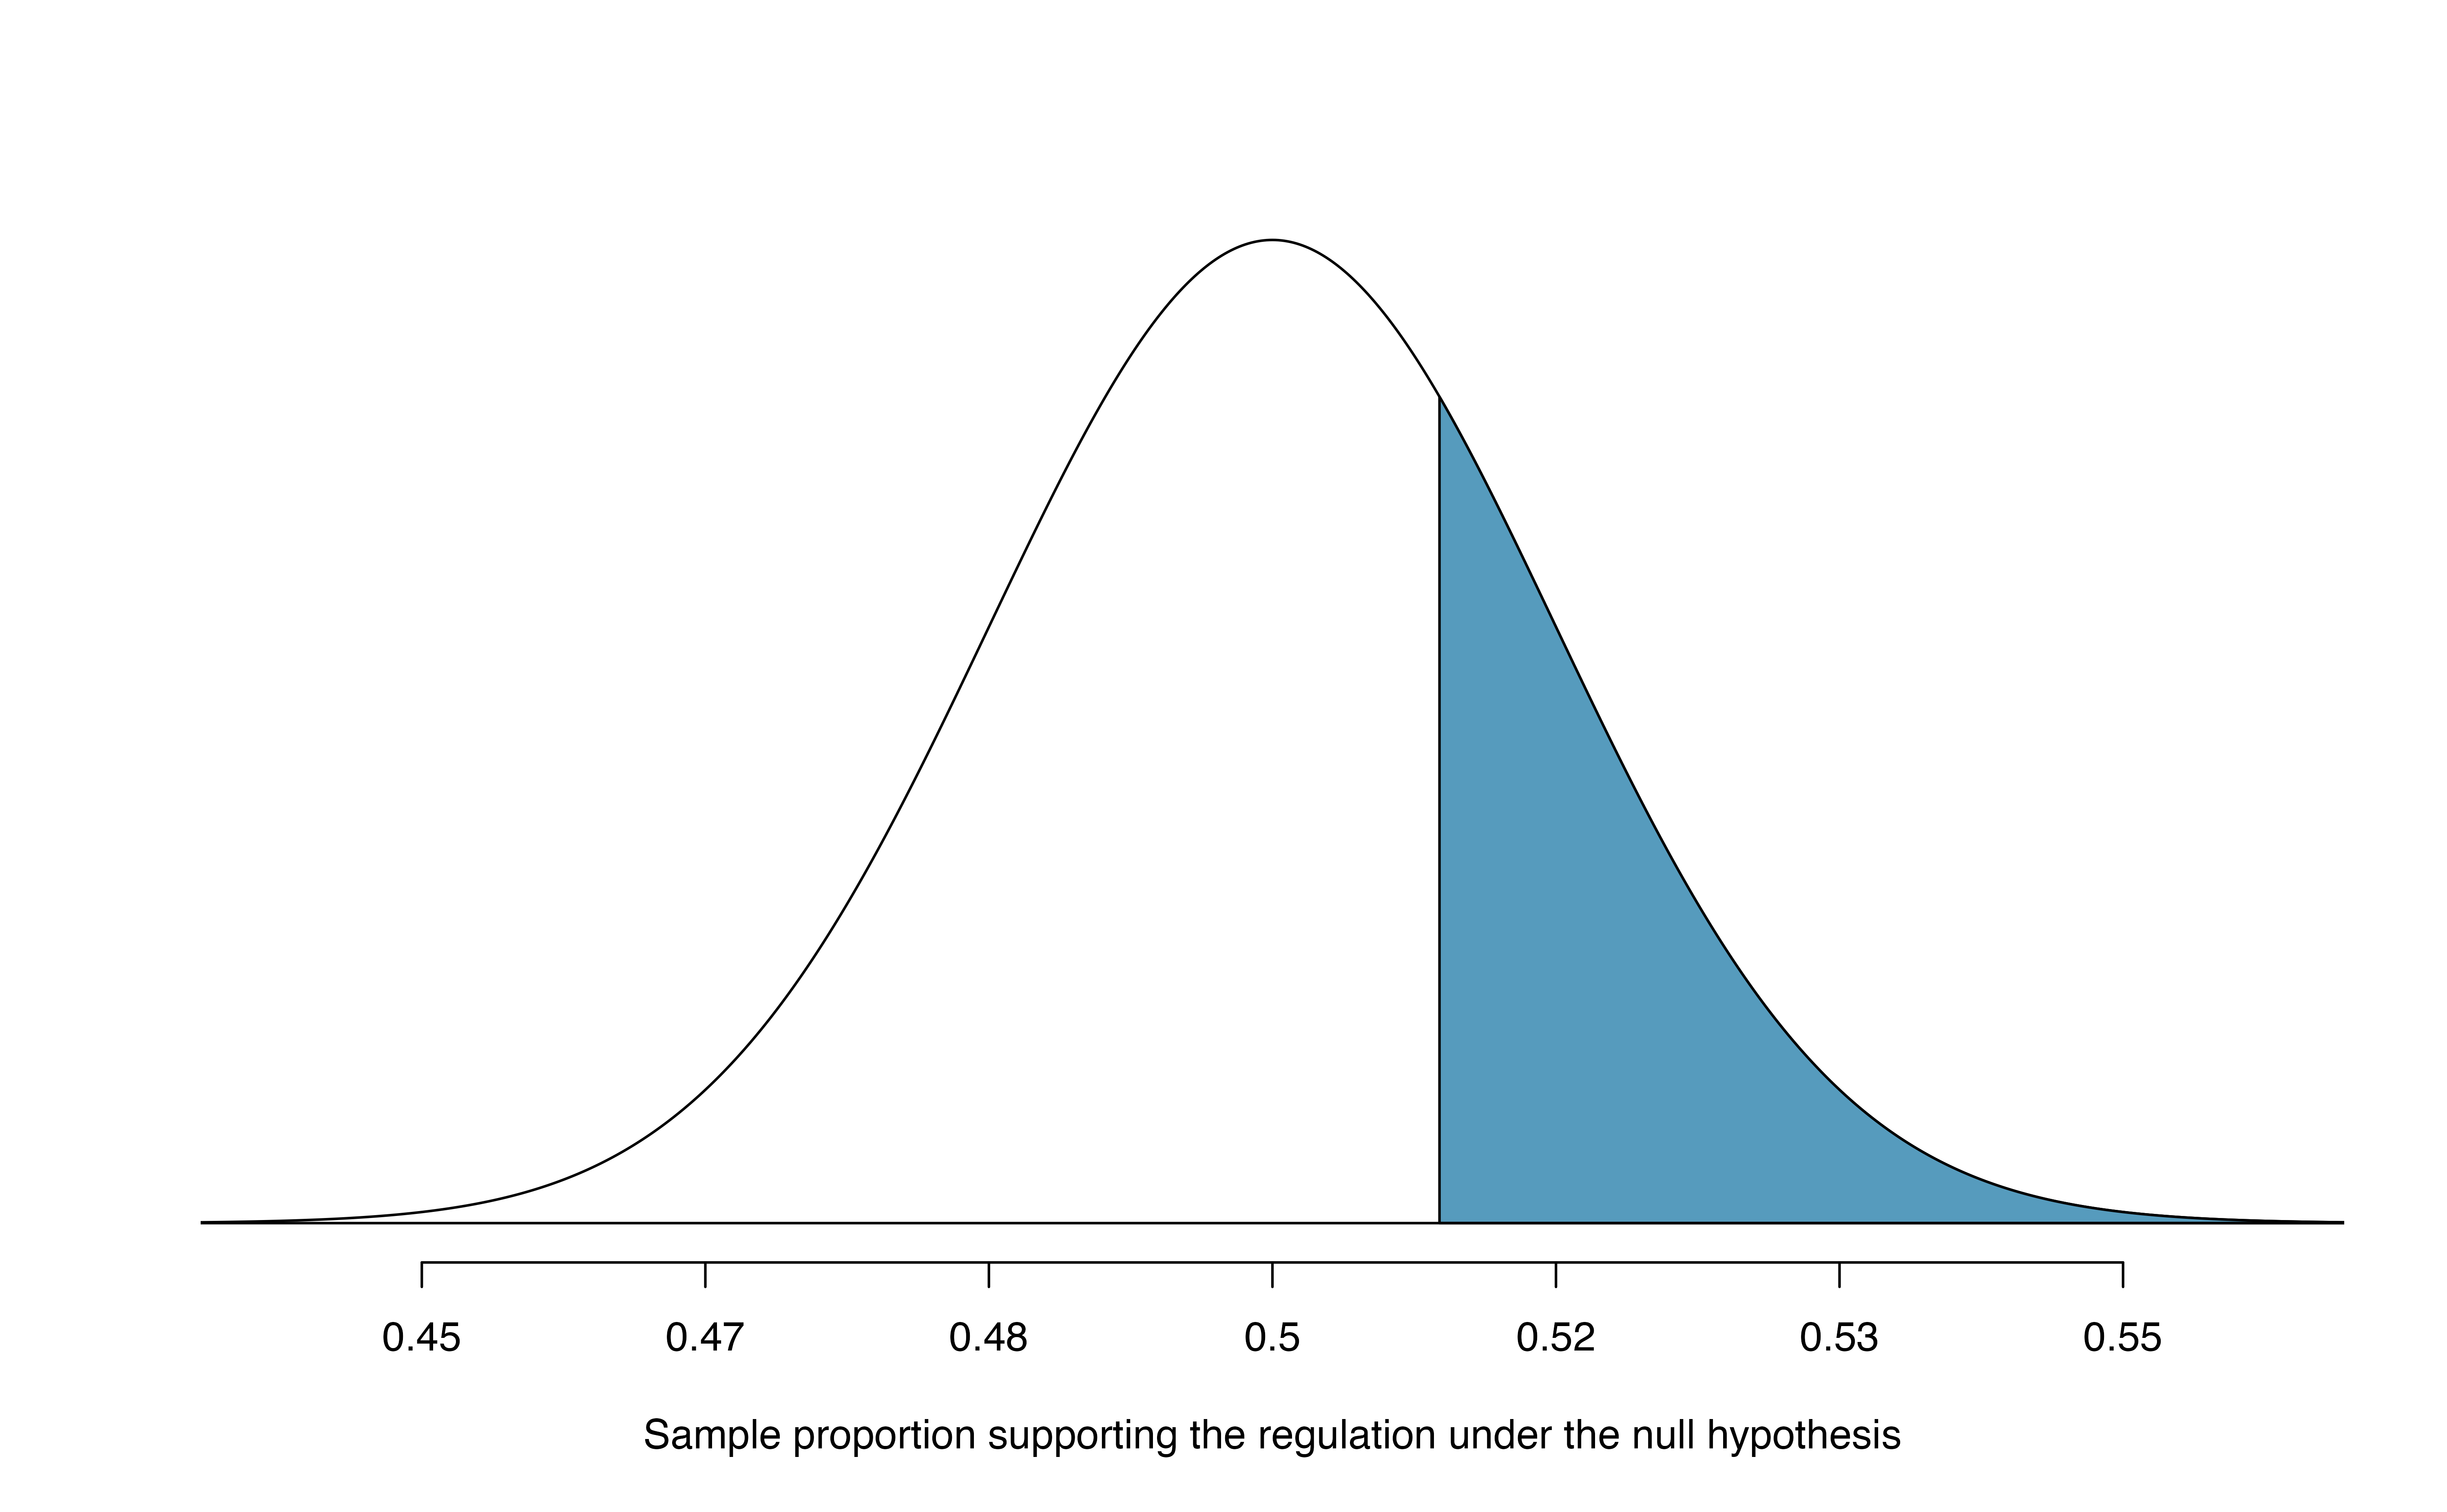 Approximate sampling distribution of $\hat{p}$ across all possible samples assuming $\pi = 0.50$. The shaded area represents the p-value corresponding to an observed sample proportion of 0.51.